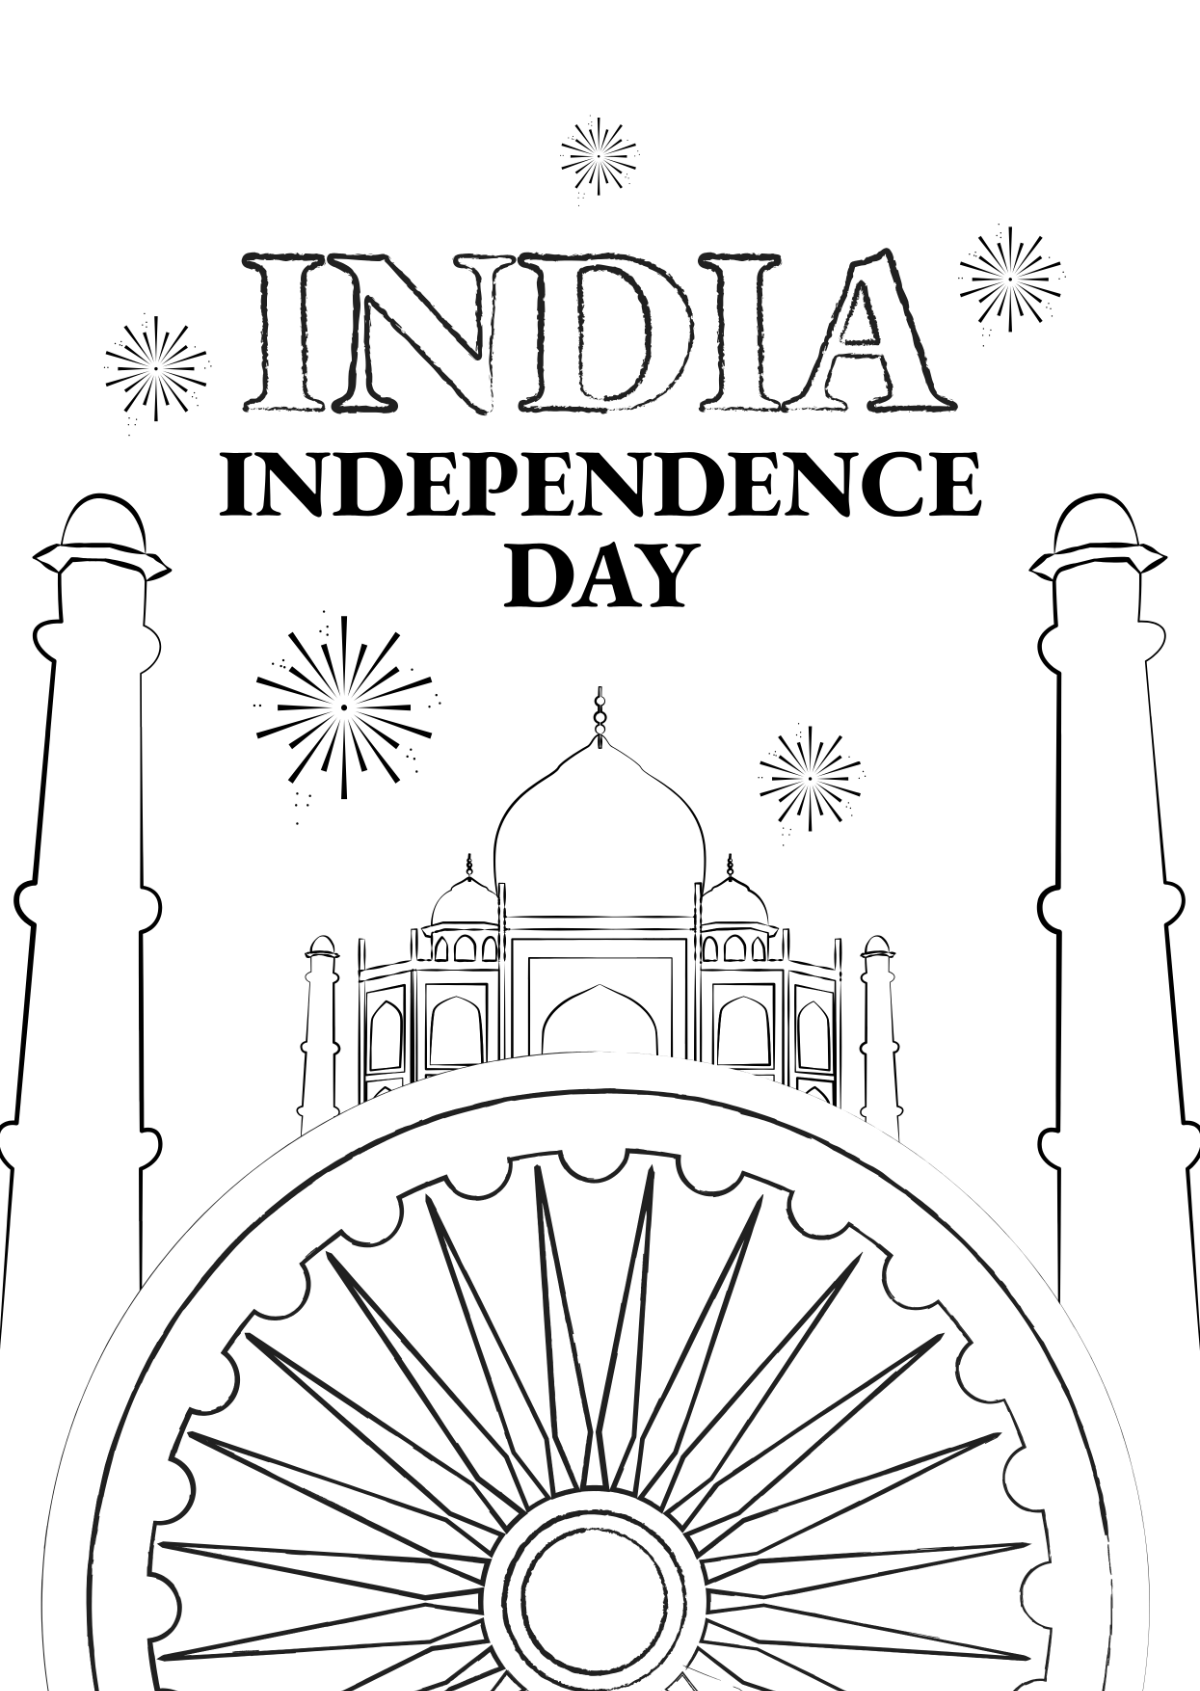 India Independence Day Pencil Drawing